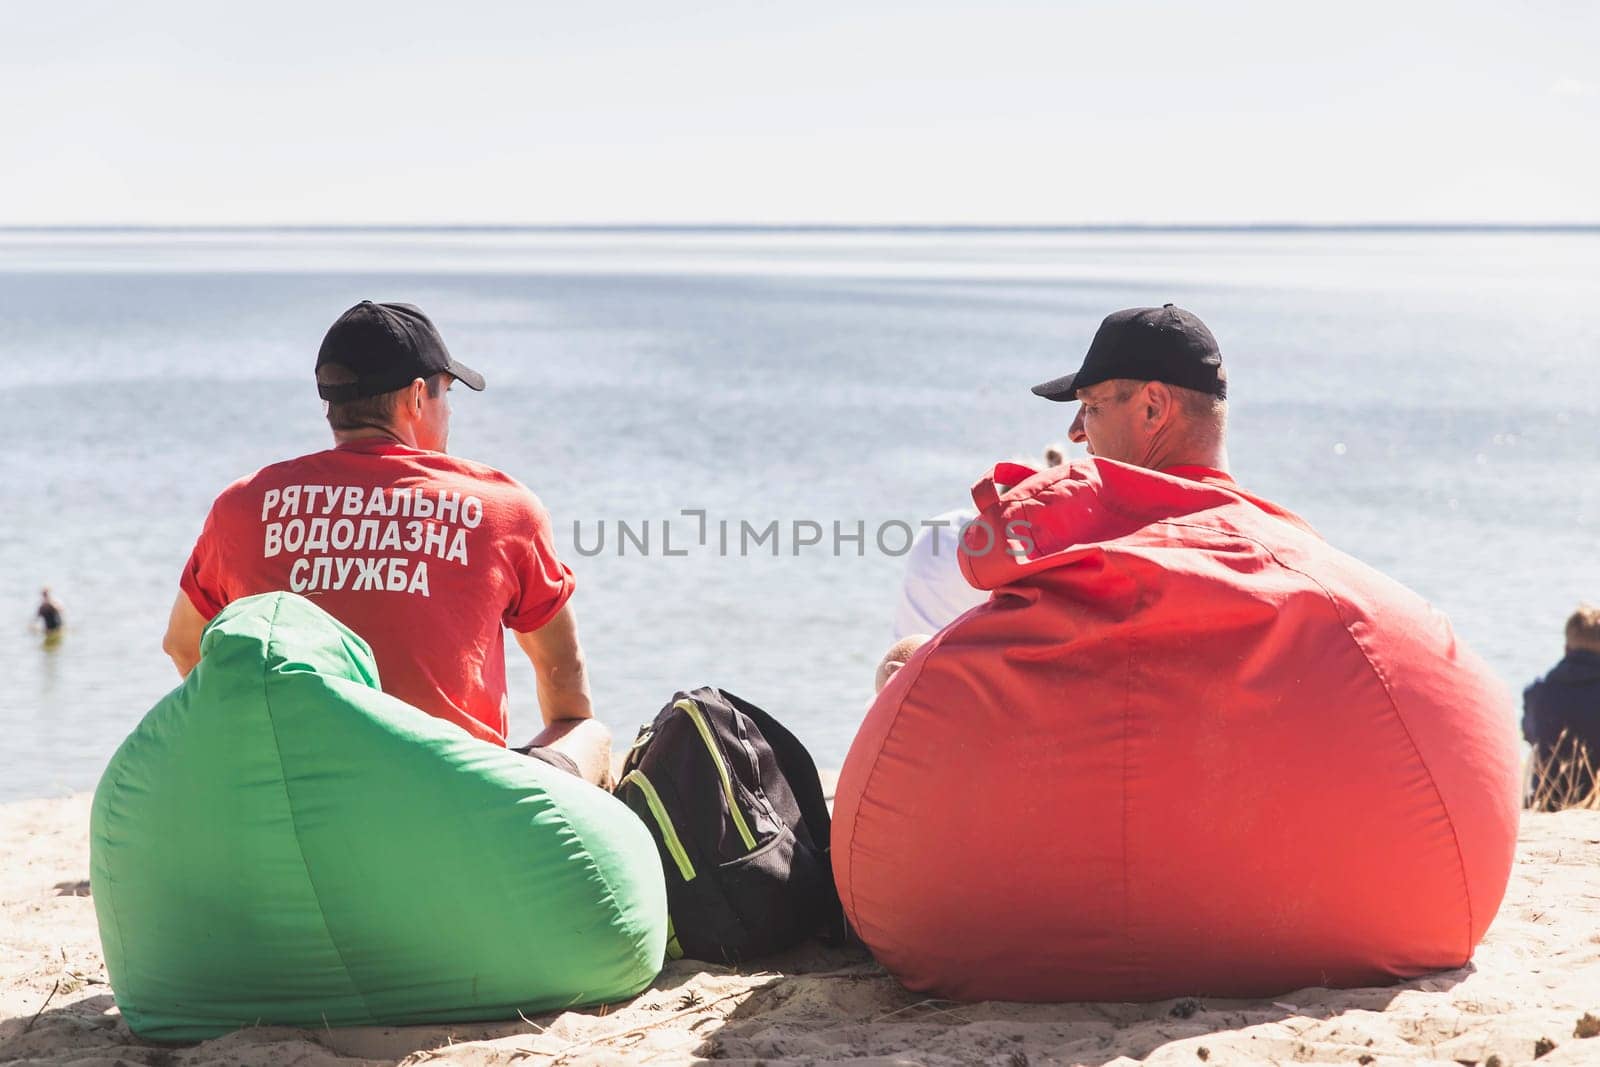 Glebovka, Ukraine, August 2020: Rescuers sit in soft chairs by the sea in Ukraine